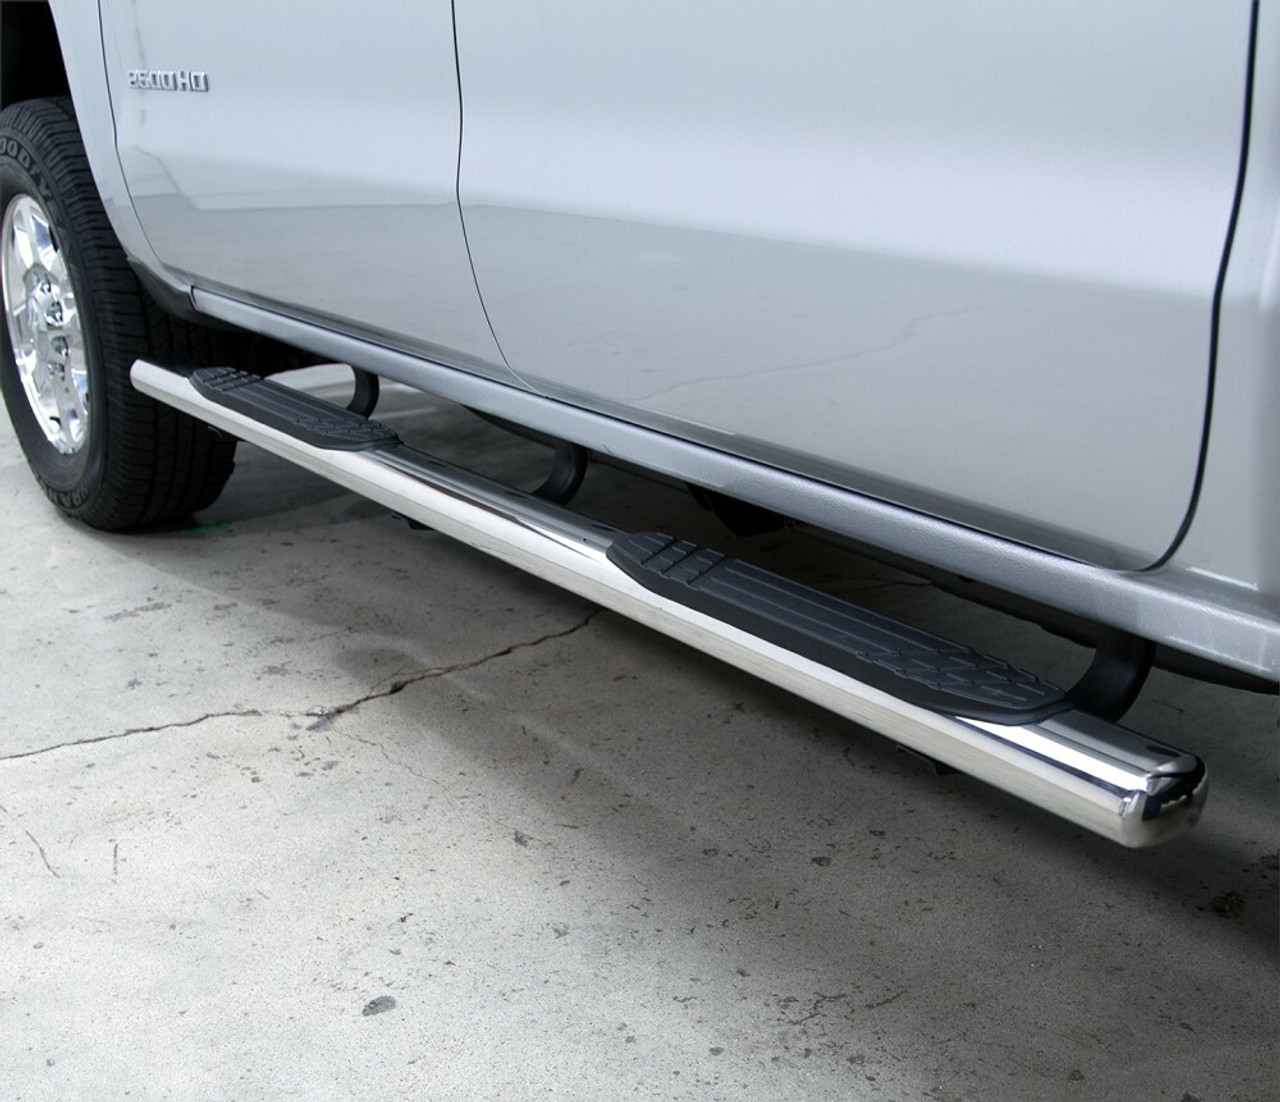 Go Rhino 684415680PS Ford, F-150, 2015 - 2021, 4 inch OE Xtreme - Complete Kit: Sidesteps + Brackets, Stainless steel, Polished, 640080PS bars + 6841565 OE Xtreme Brackets. 4 inch wide x 80 inch long side bars